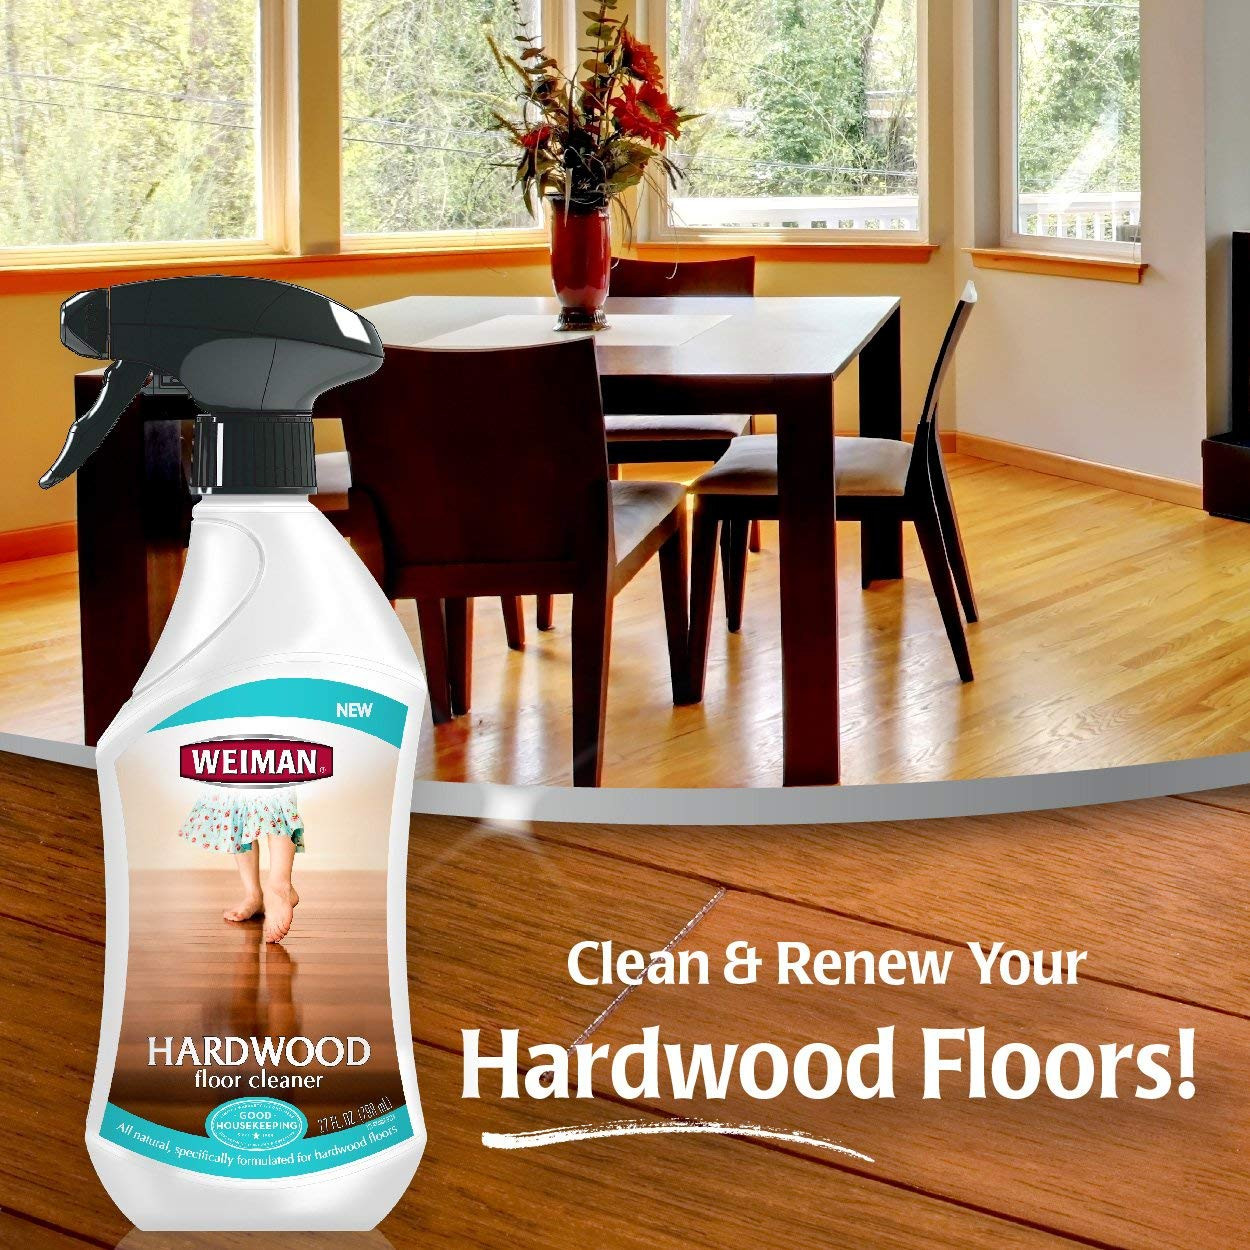 best type of wood for hardwood floors of amazon com weiman hardwood floor cleaner surface safe no harsh intended for amazon com weiman hardwood floor cleaner surface safe no harsh scent safe for use around kids and pets residue free 27 oz trigger home kitchen